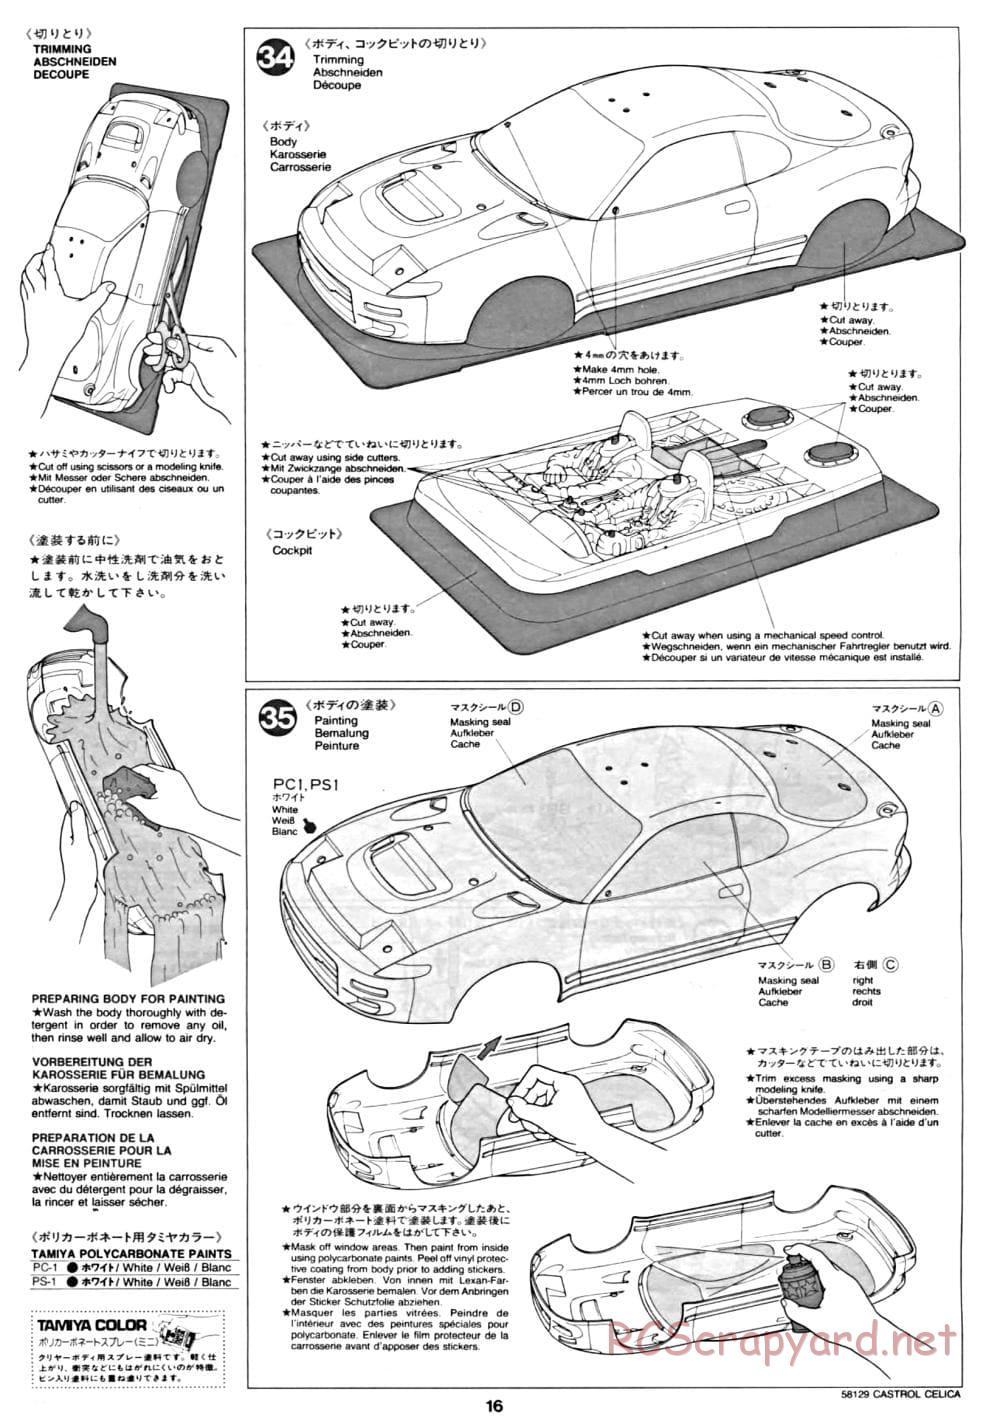 Tamiya - Castrol Celica 93 Monte-Carlo - TA-02 Chassis - Manual - Page 16